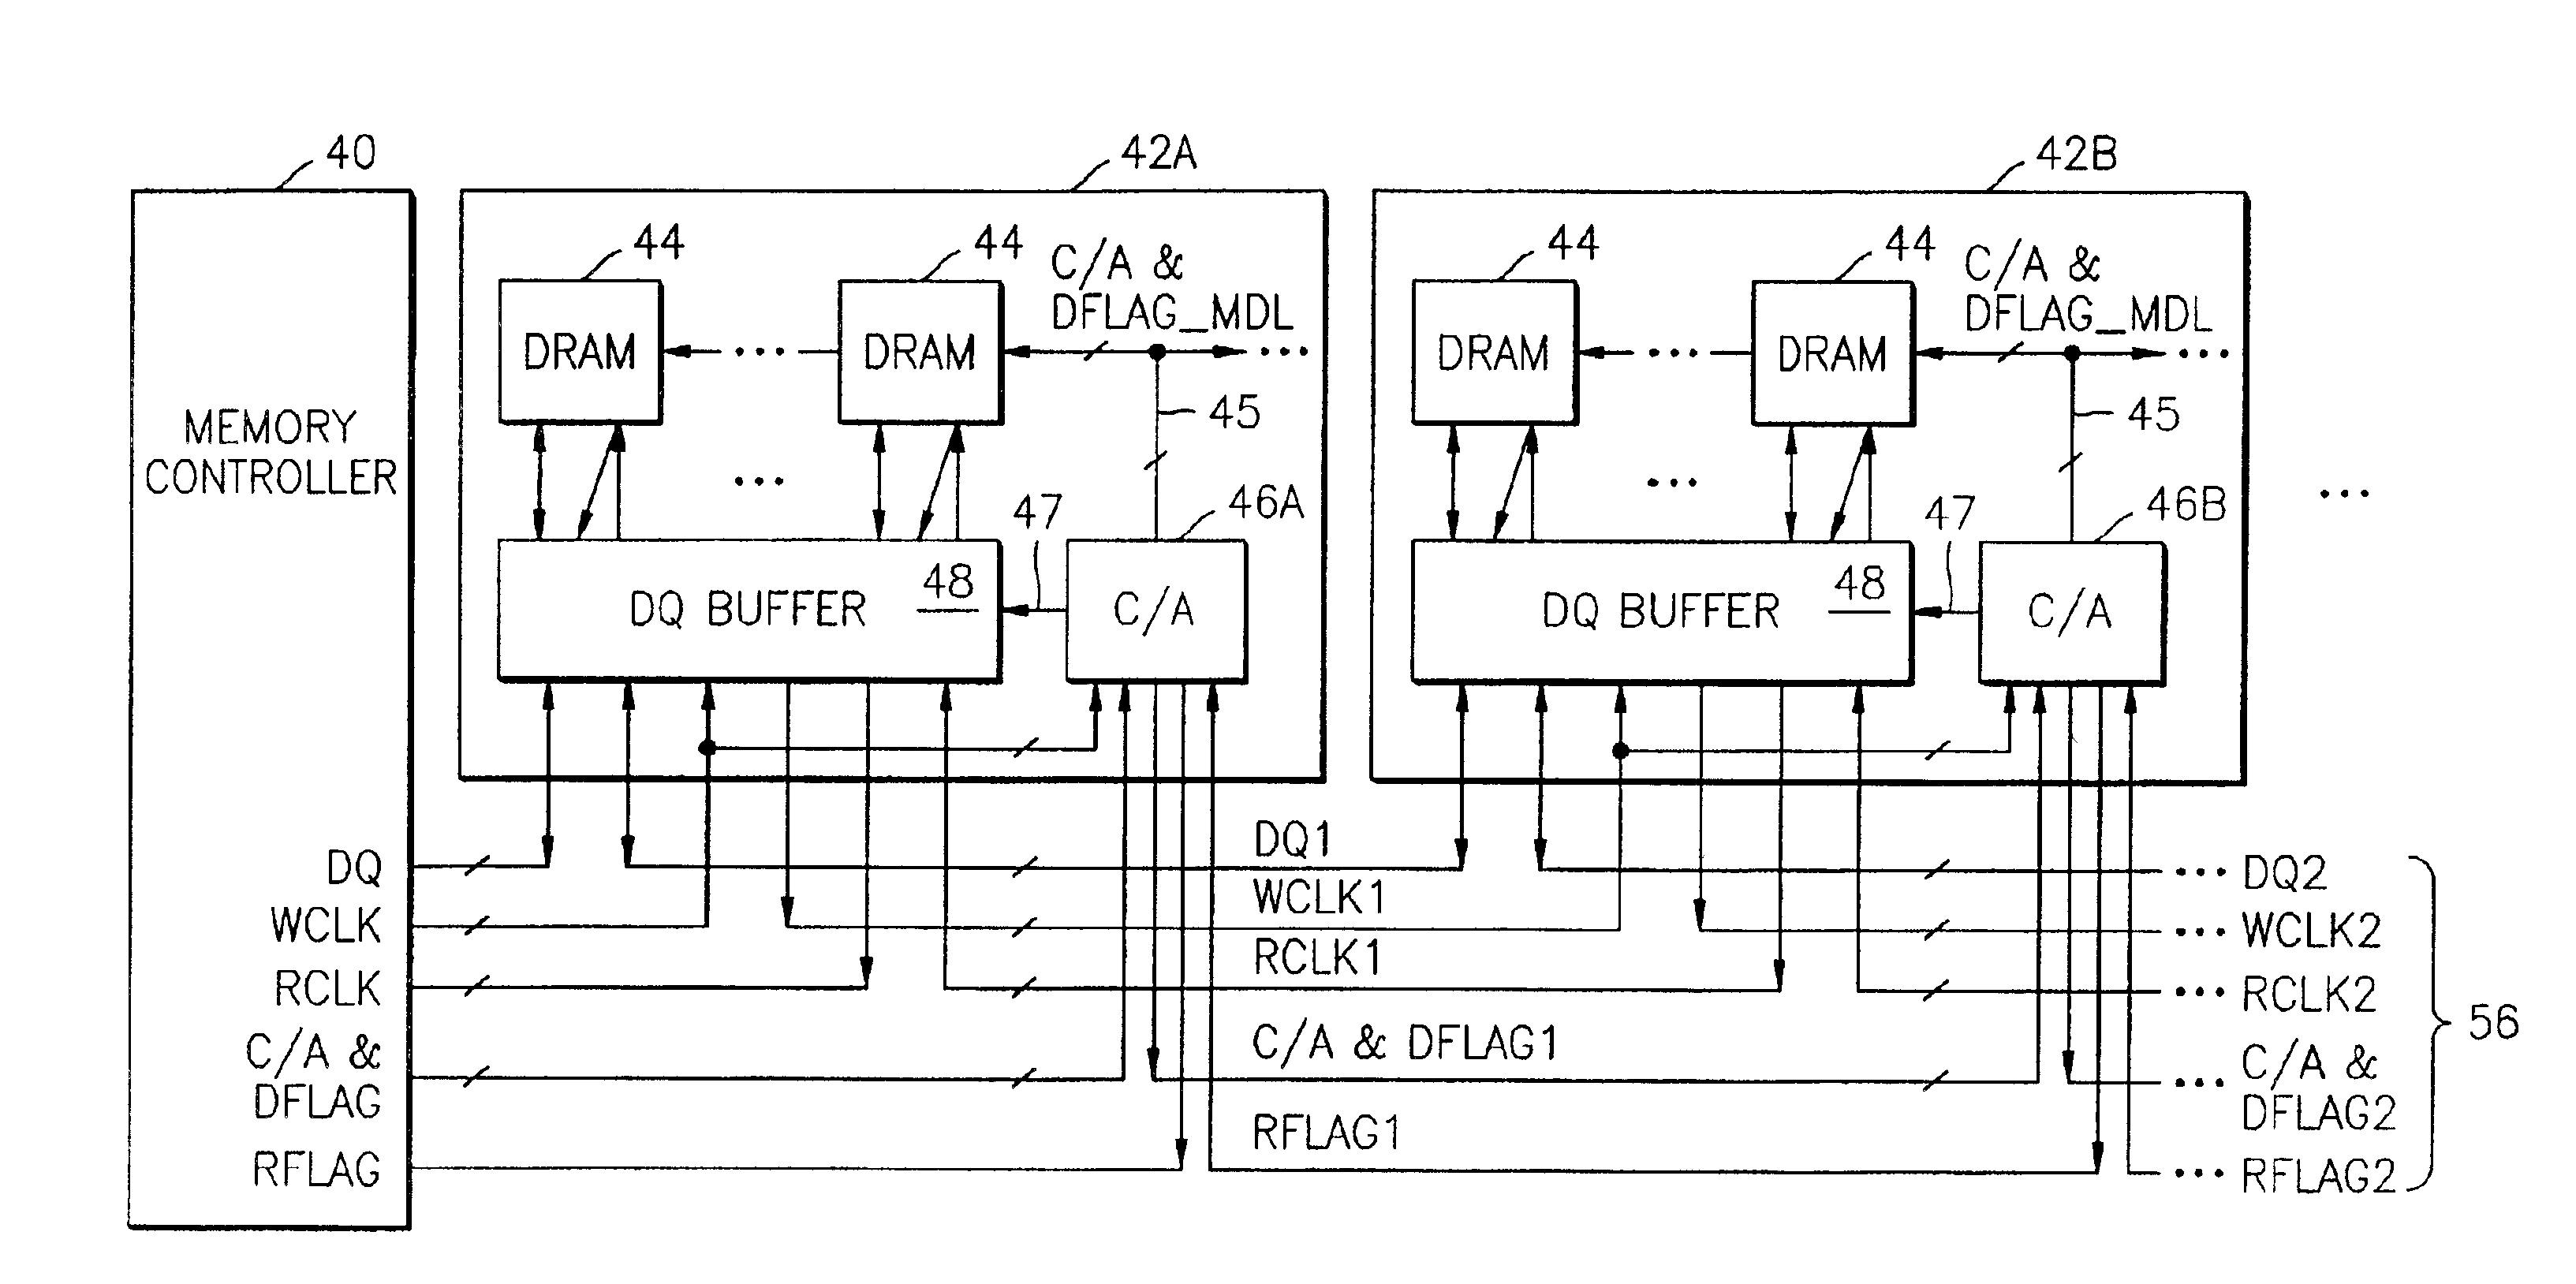 Memory system having point-to-point bus configuration